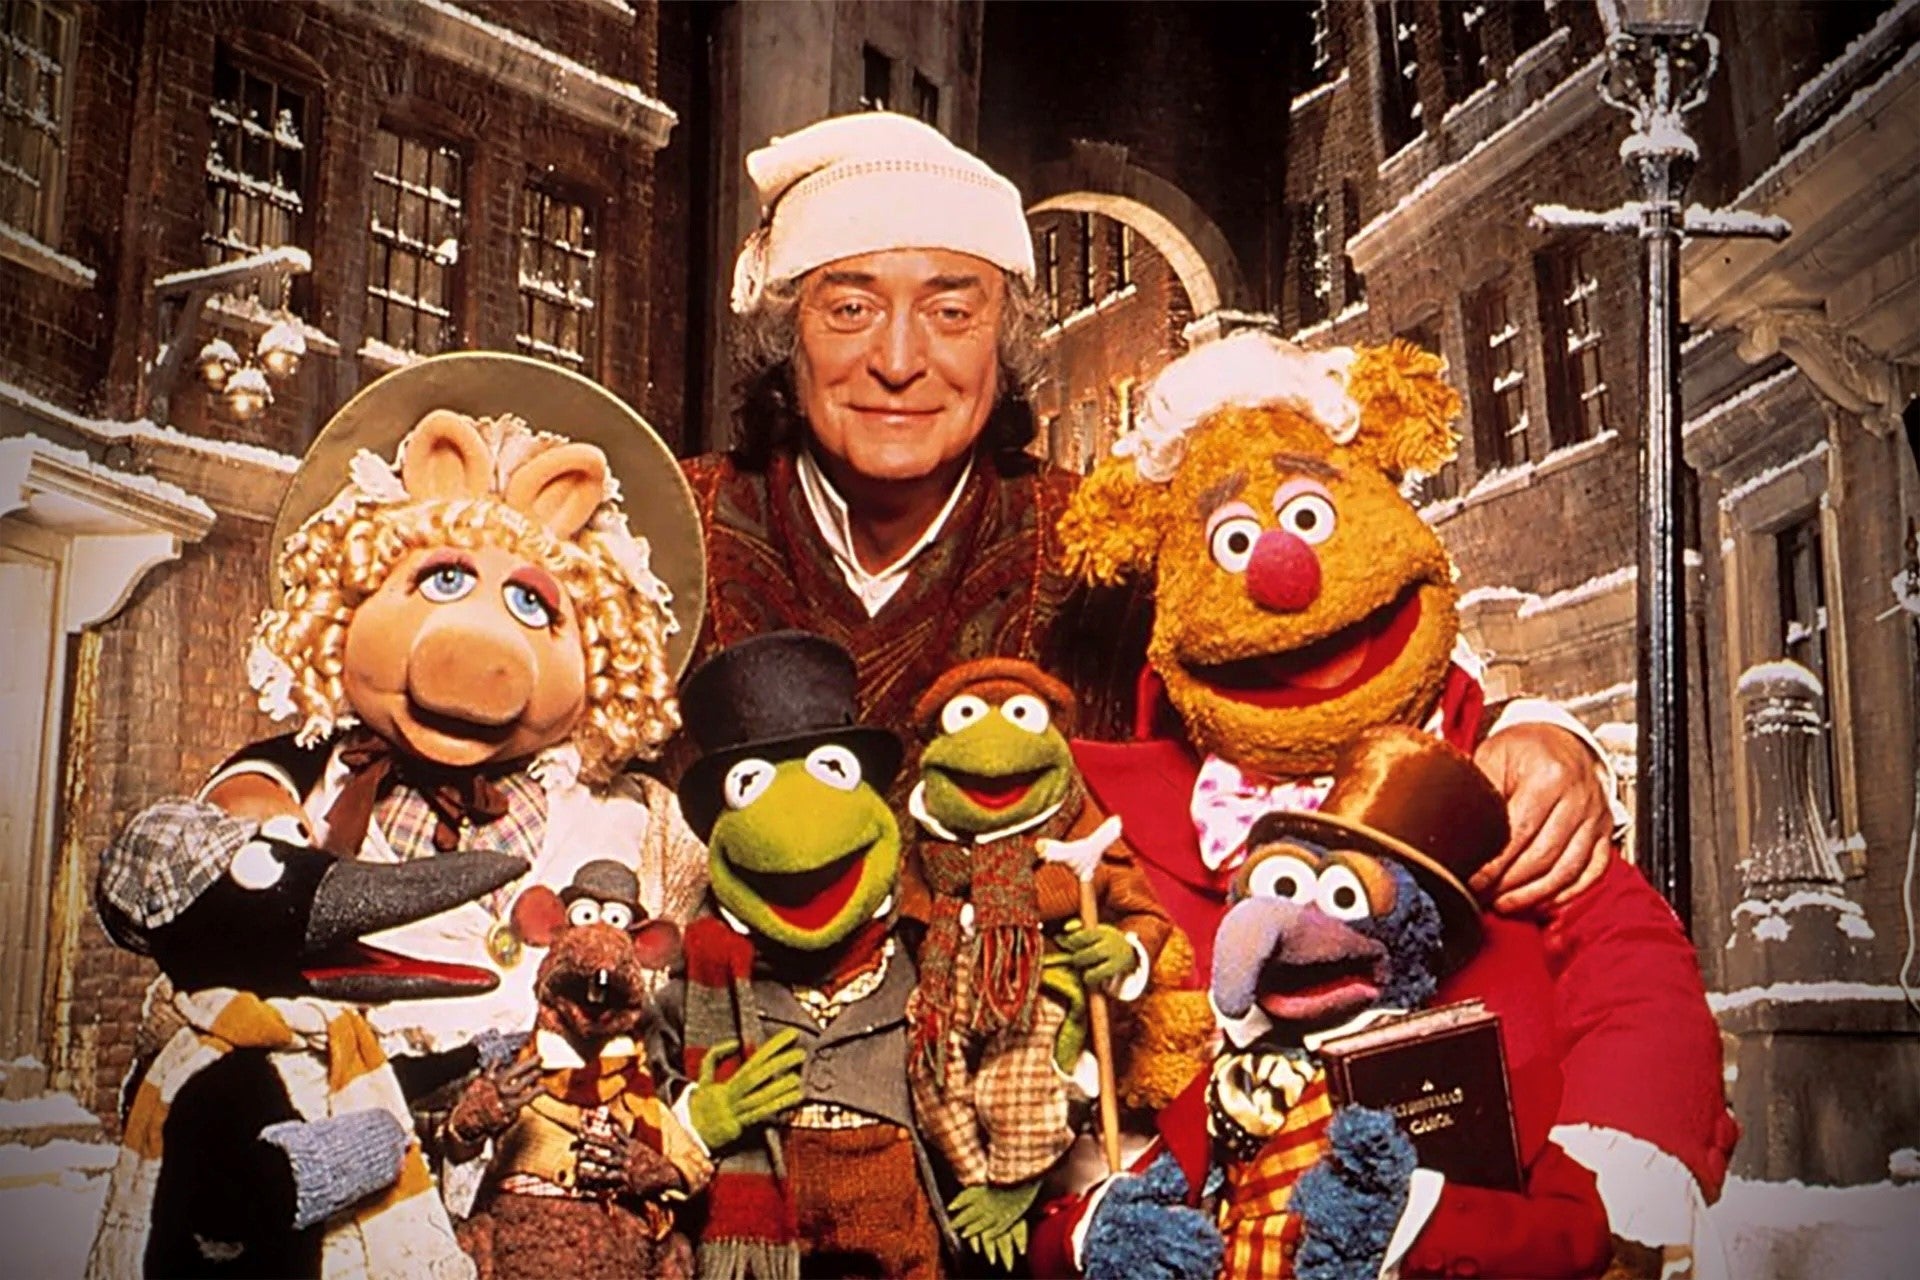 Michael Caine as Scrooge, surrounded by a cast of Muppets in The Muppet Christmas Carol